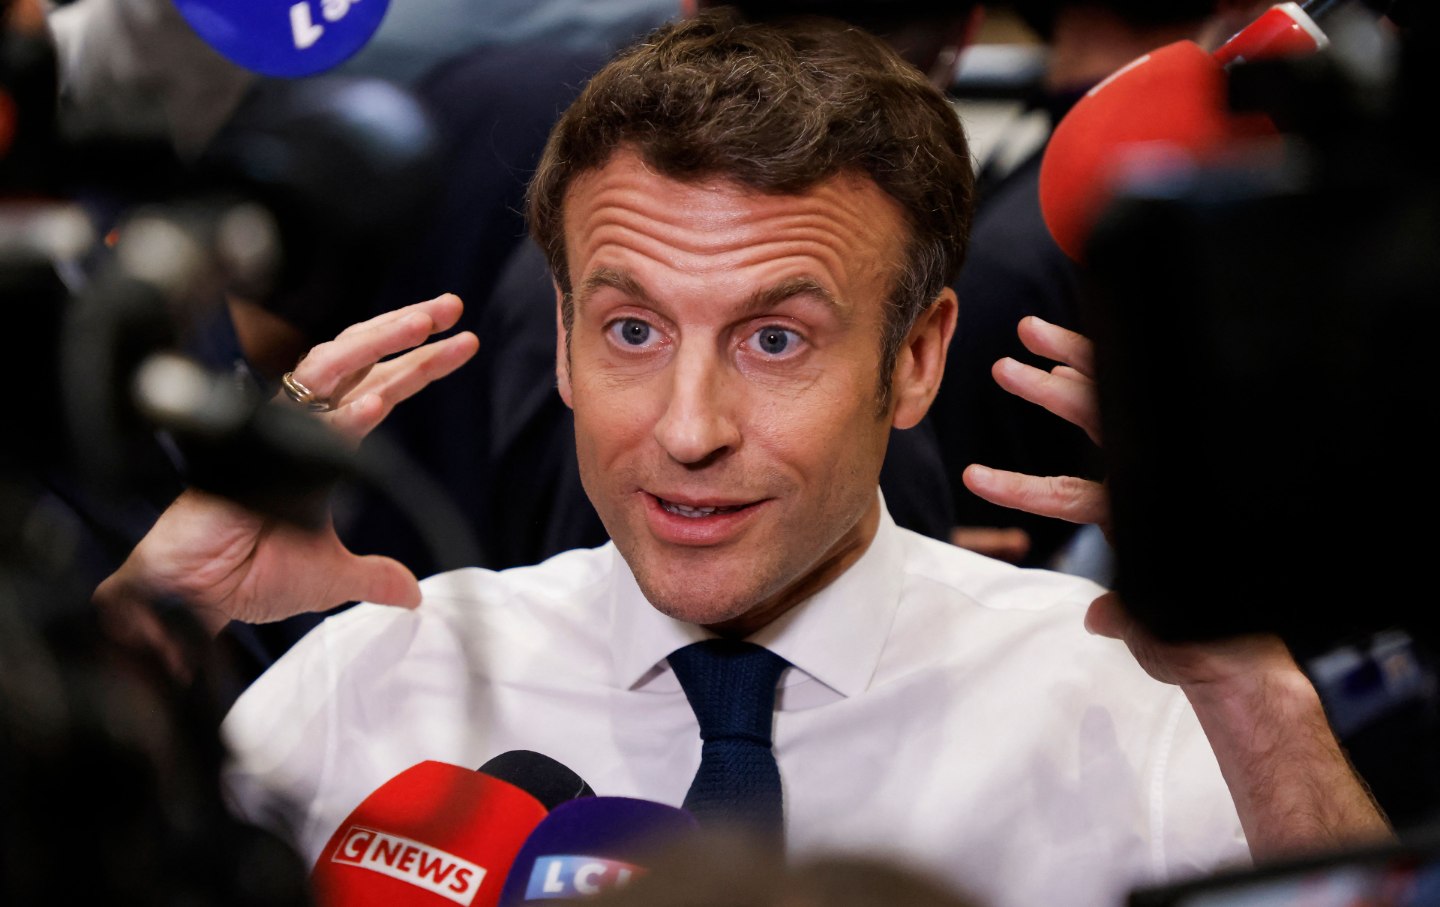 Emmanuel Macron gesticulates while speaking to the press